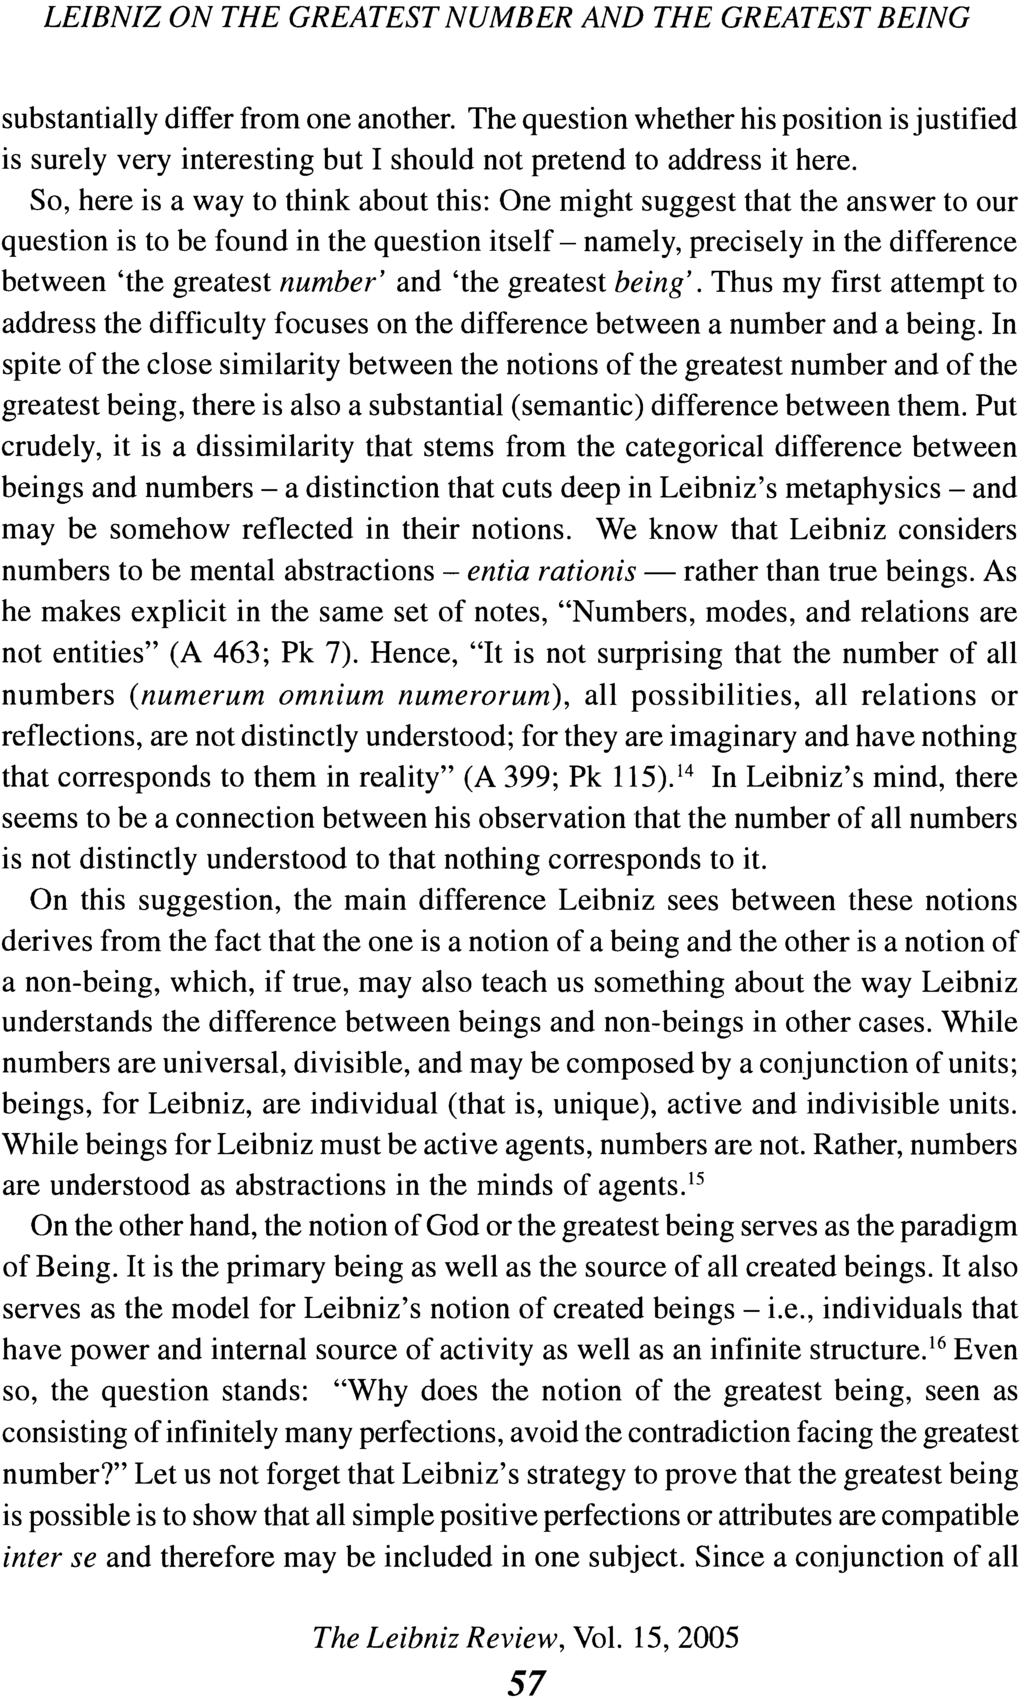 LEIBNIZ ON THE GREATEST NUMBER AND THE GREATEST BEING substantially differ from one another.